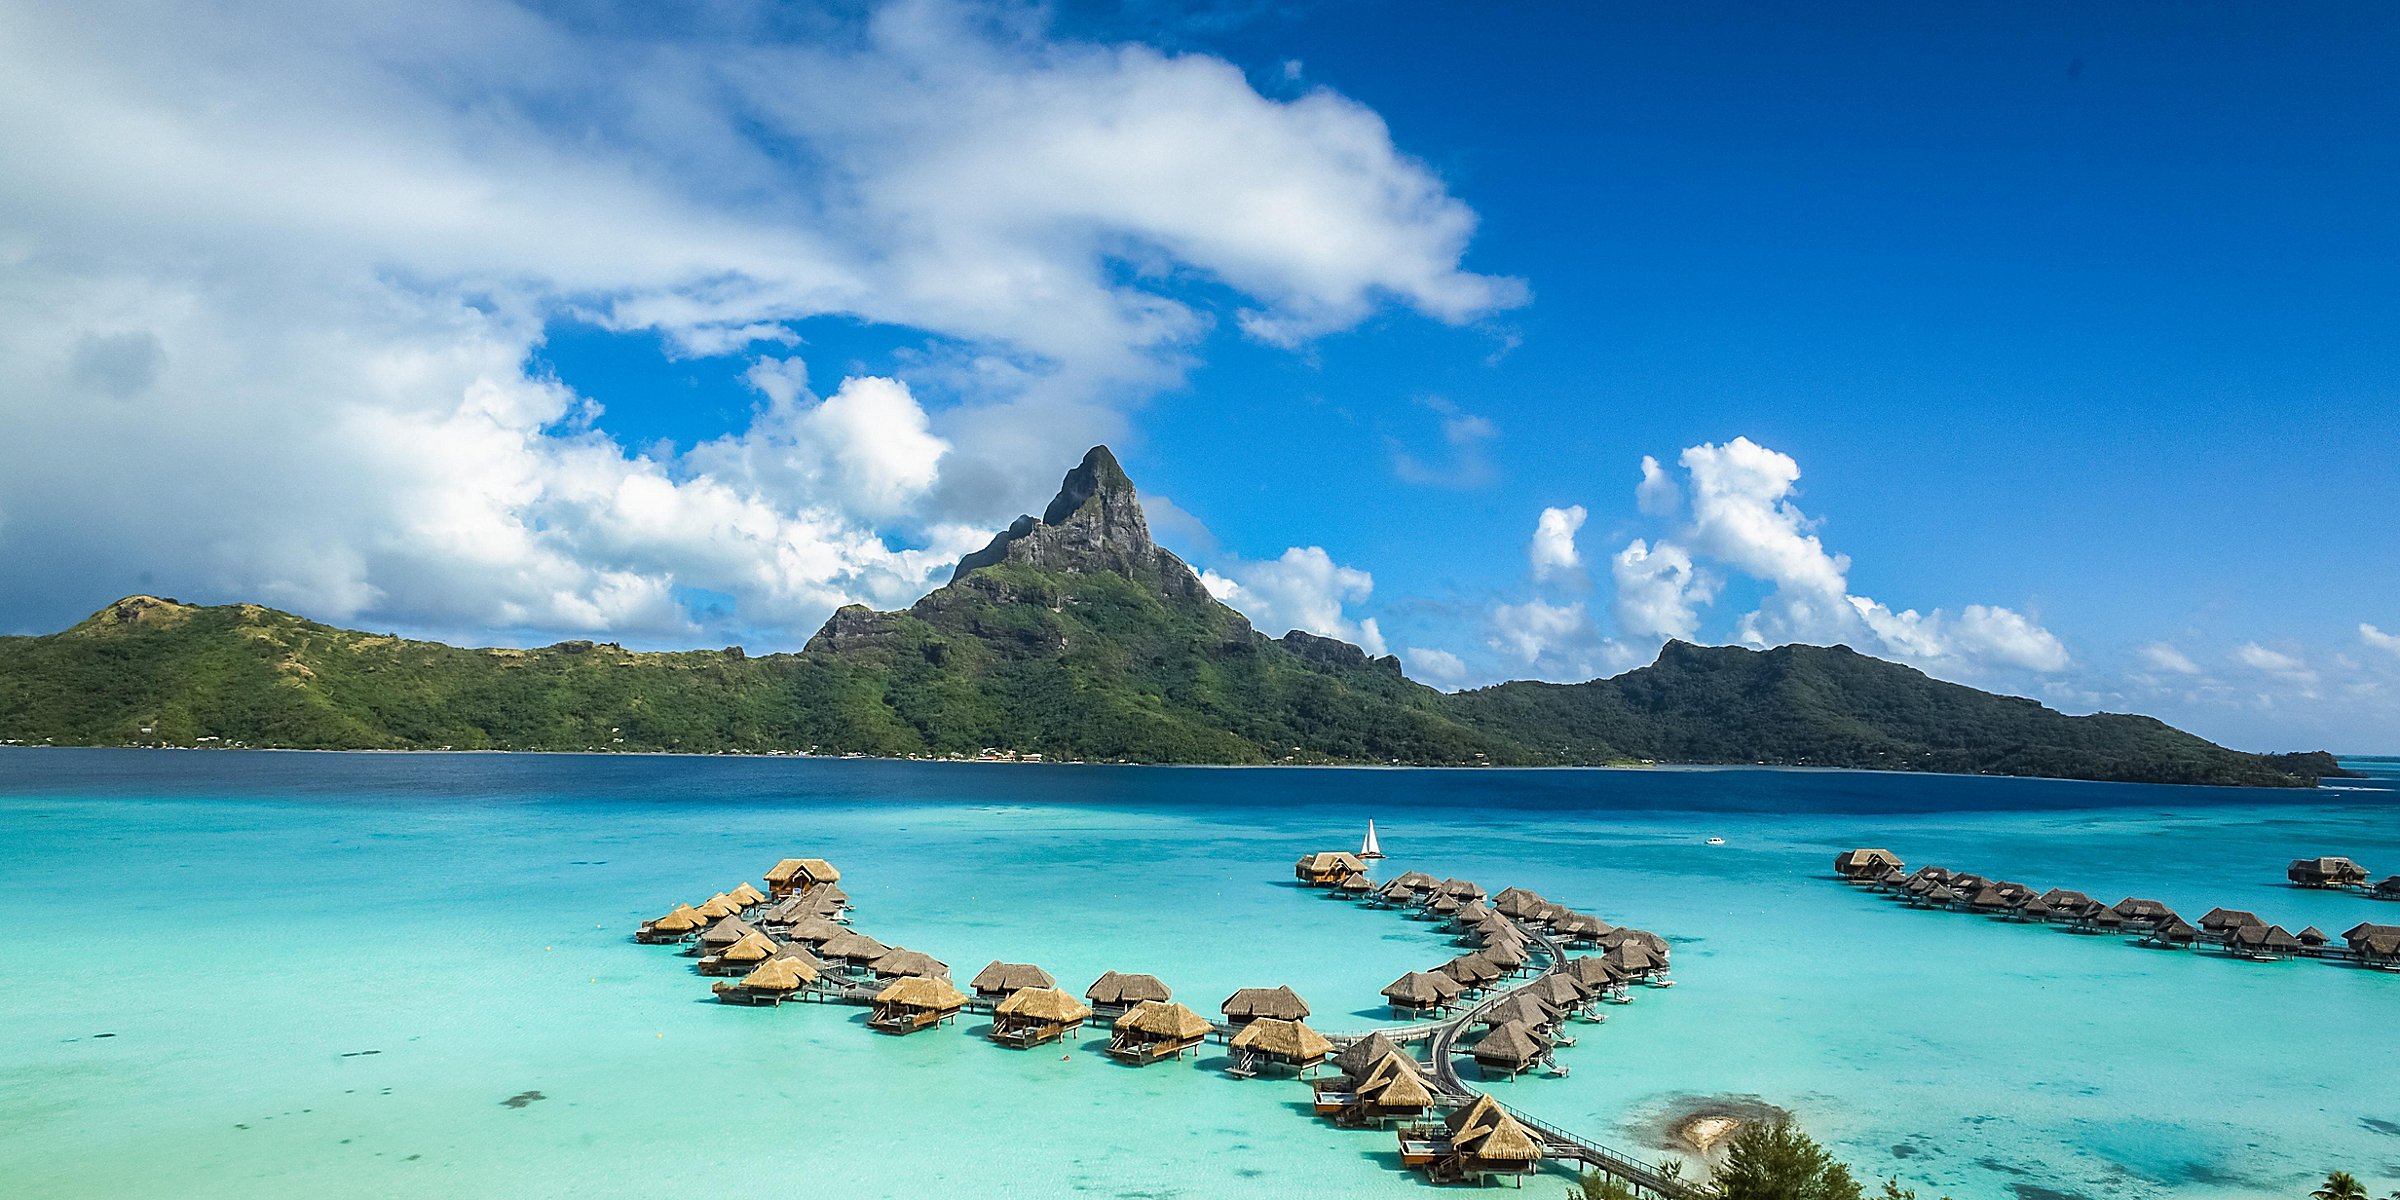 How to Travel Bora Bora on a Budget - Tips to keep Bora Bora trip costs low  - Going Awesome Places